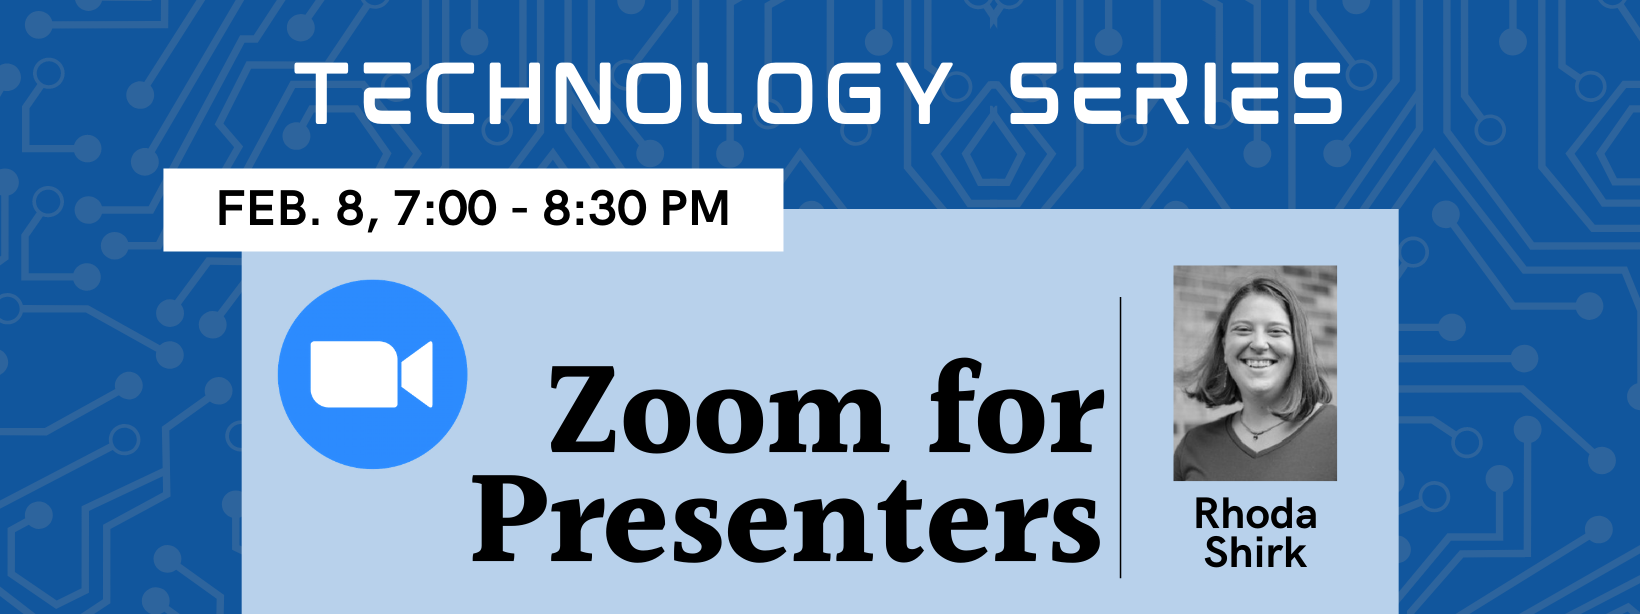 Zoom for Presenters